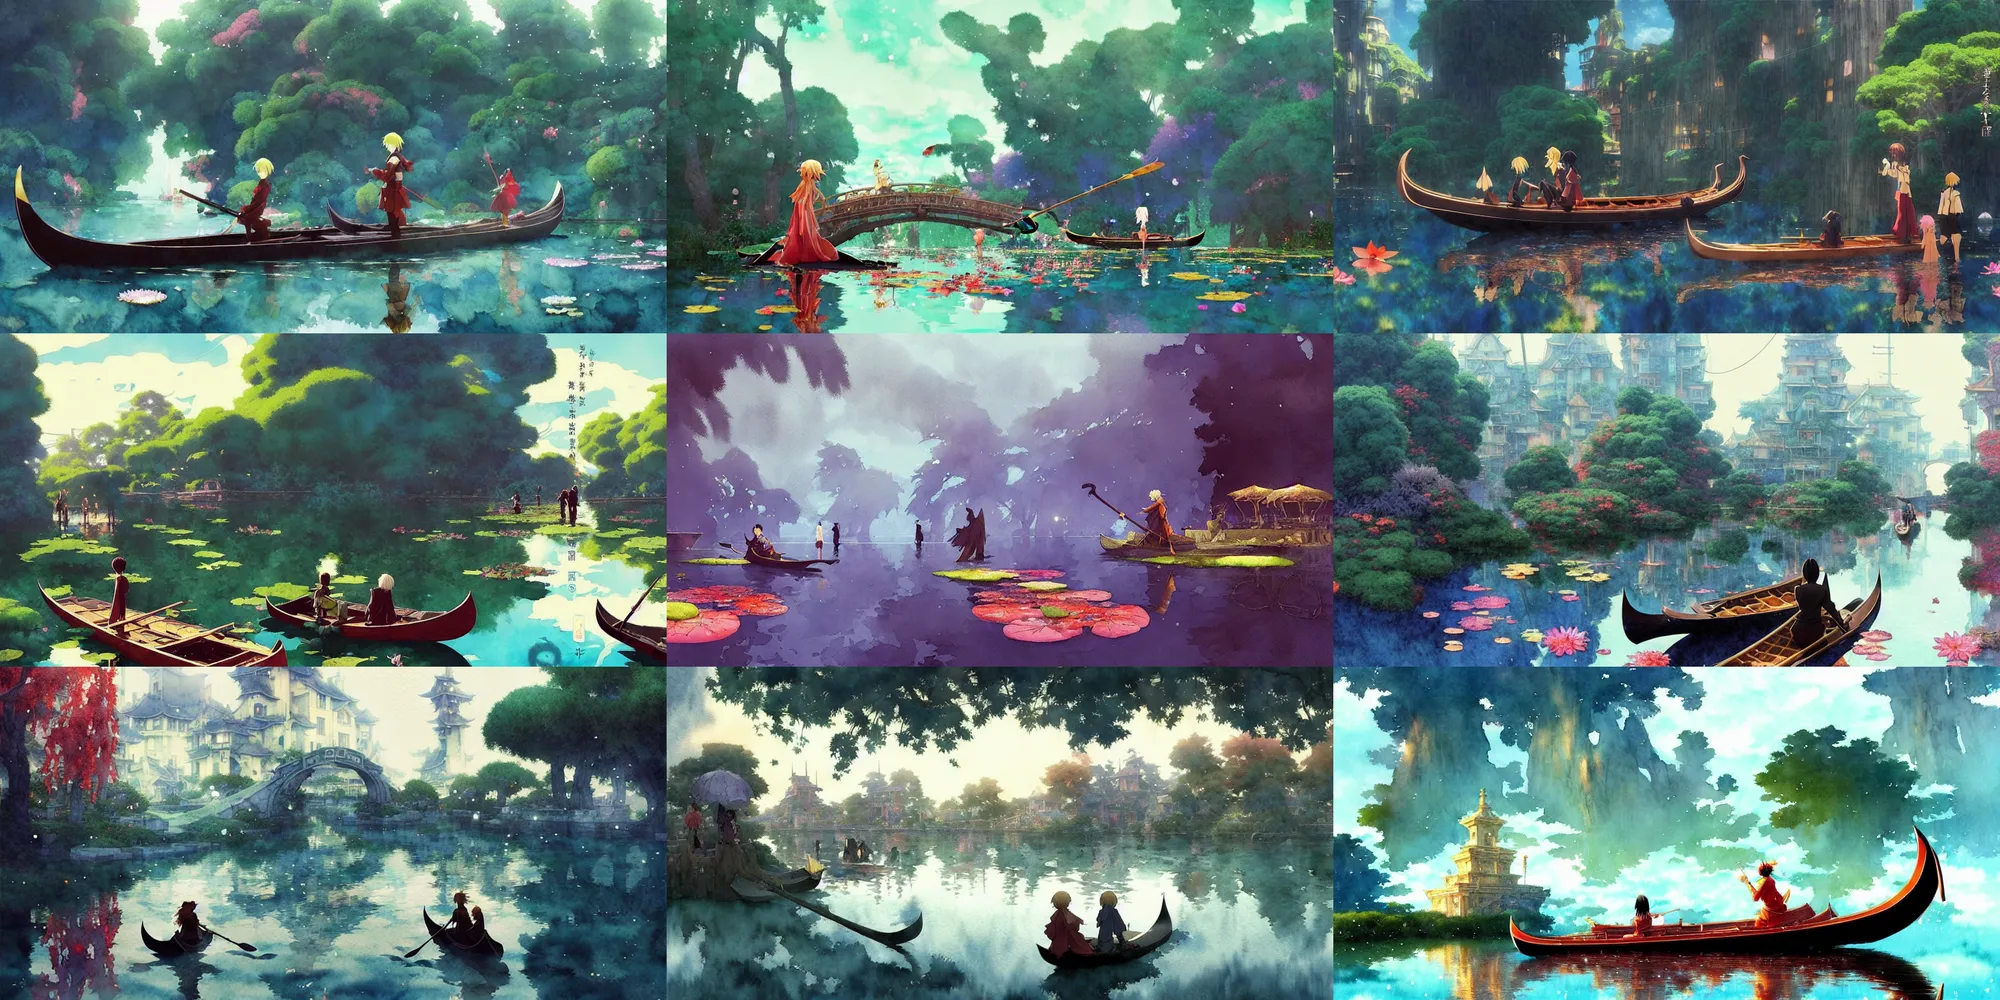 Prompt: anime movie screenshot, characters, waterway, fantasy. gondola boat, amazing composition, colorful watercolor, lily pads, reflections, by ruan jia, by maxfield parrish, by koji morimoto, by zeen chin, by sparth, by zhang kechun, illustration, gloomy, giant statues!!!!!!!, winter